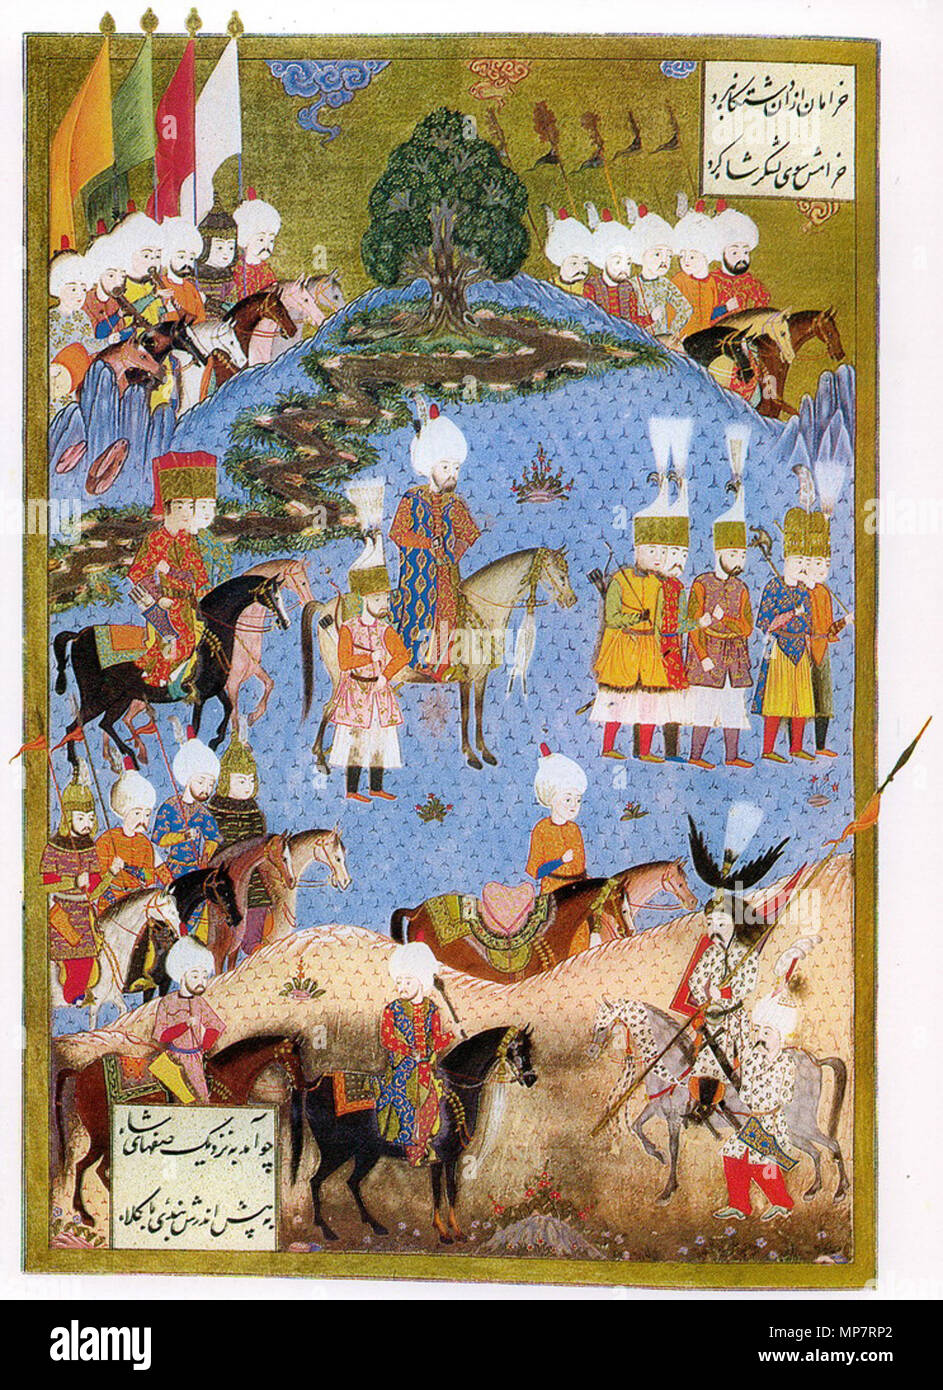 . Miniature with poems in Persian language written at two corners: Suleiman the magnificent marching with army in Nakhichevan, summer 1554 . 1561. Fethullah Çelebi Arifi (historian, poet and painter) and/or Matrakçı Nasuh (painter of landscape) and/or other painters at the court of Sultan Suleiman the magnificent, 16th century 1149 Sueleymanname nahcevan Stock Photo